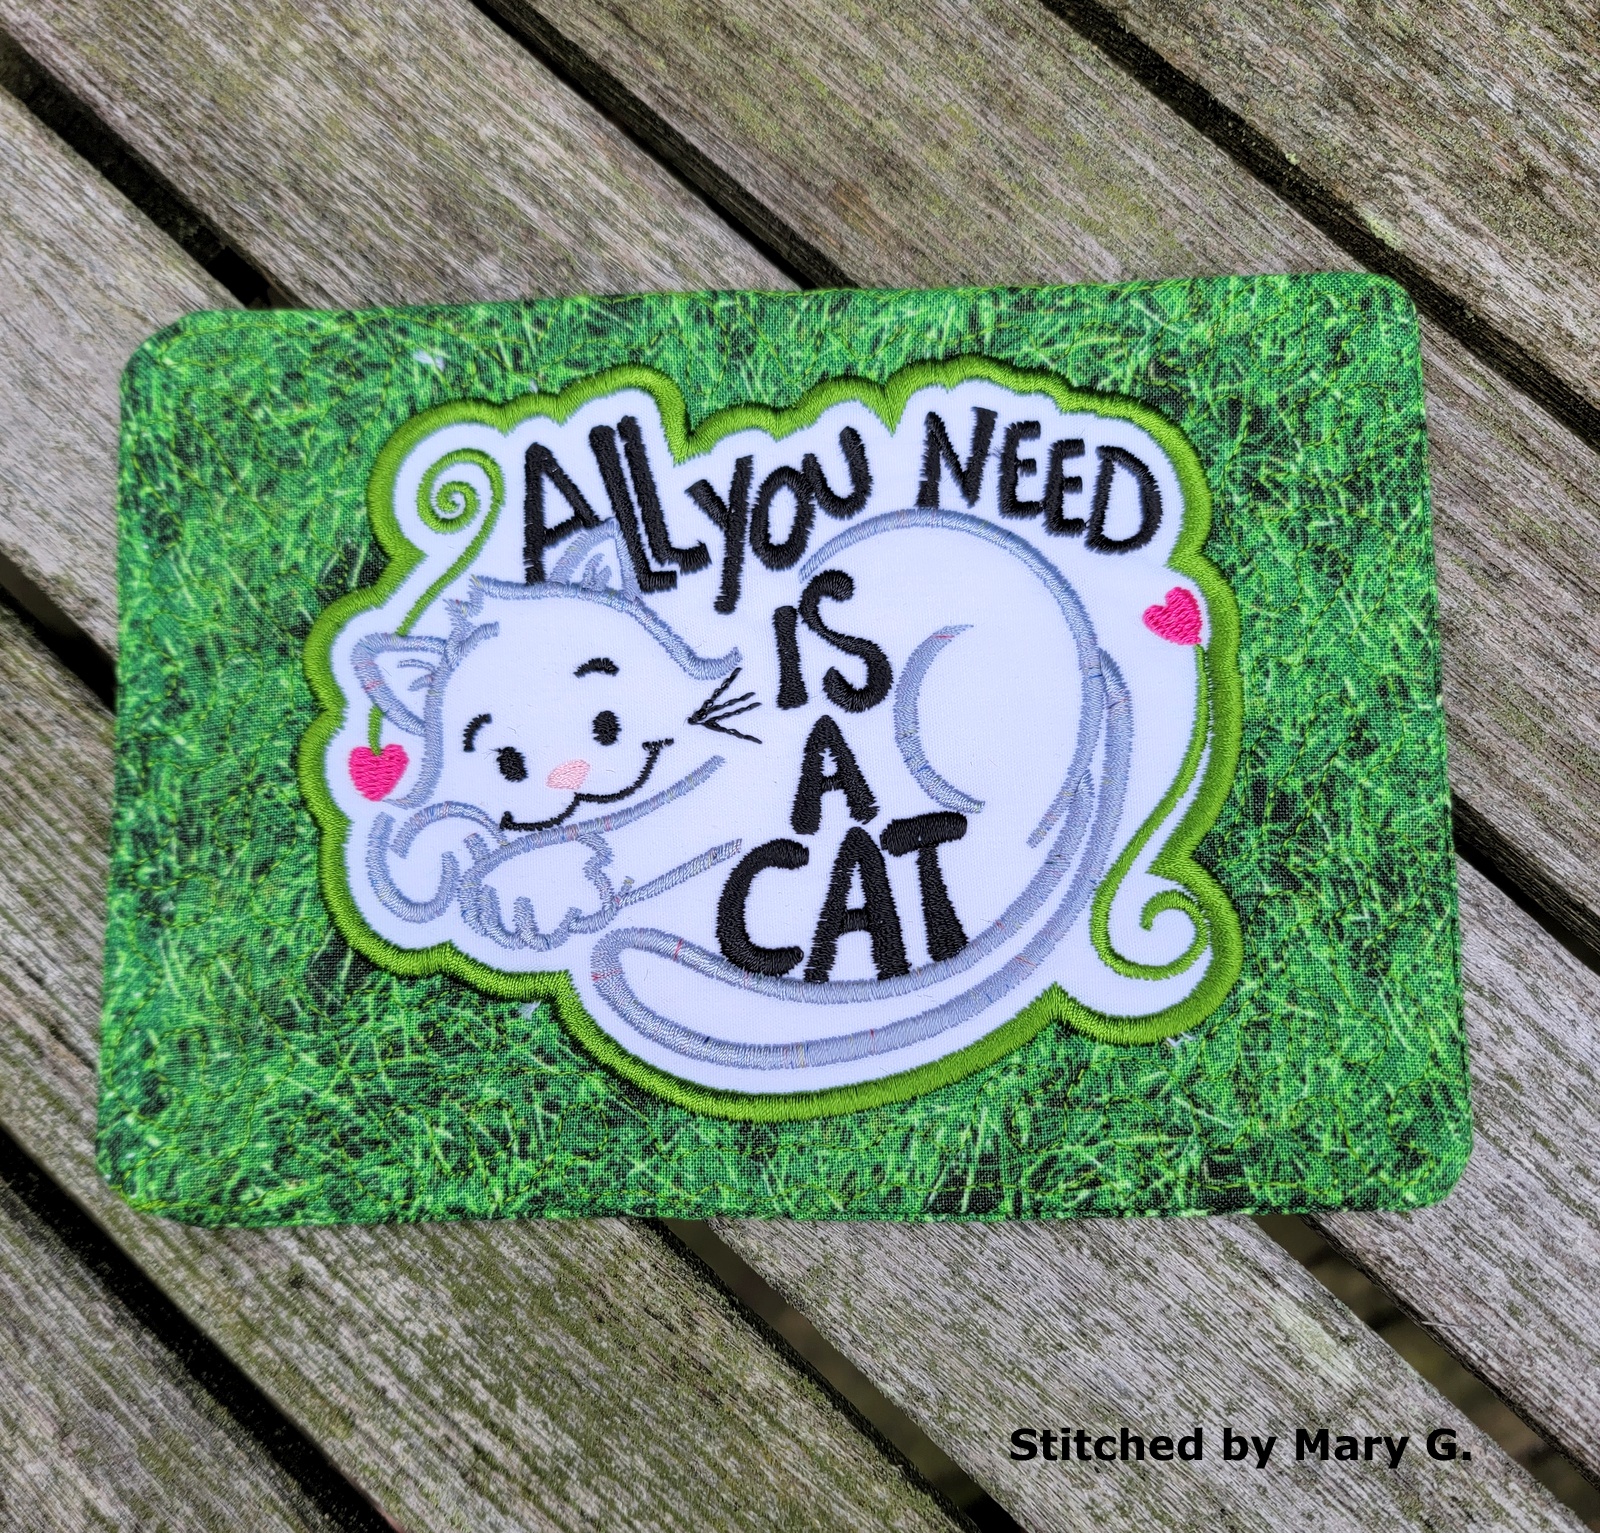 All You Need is a Cat Mug Rug-9